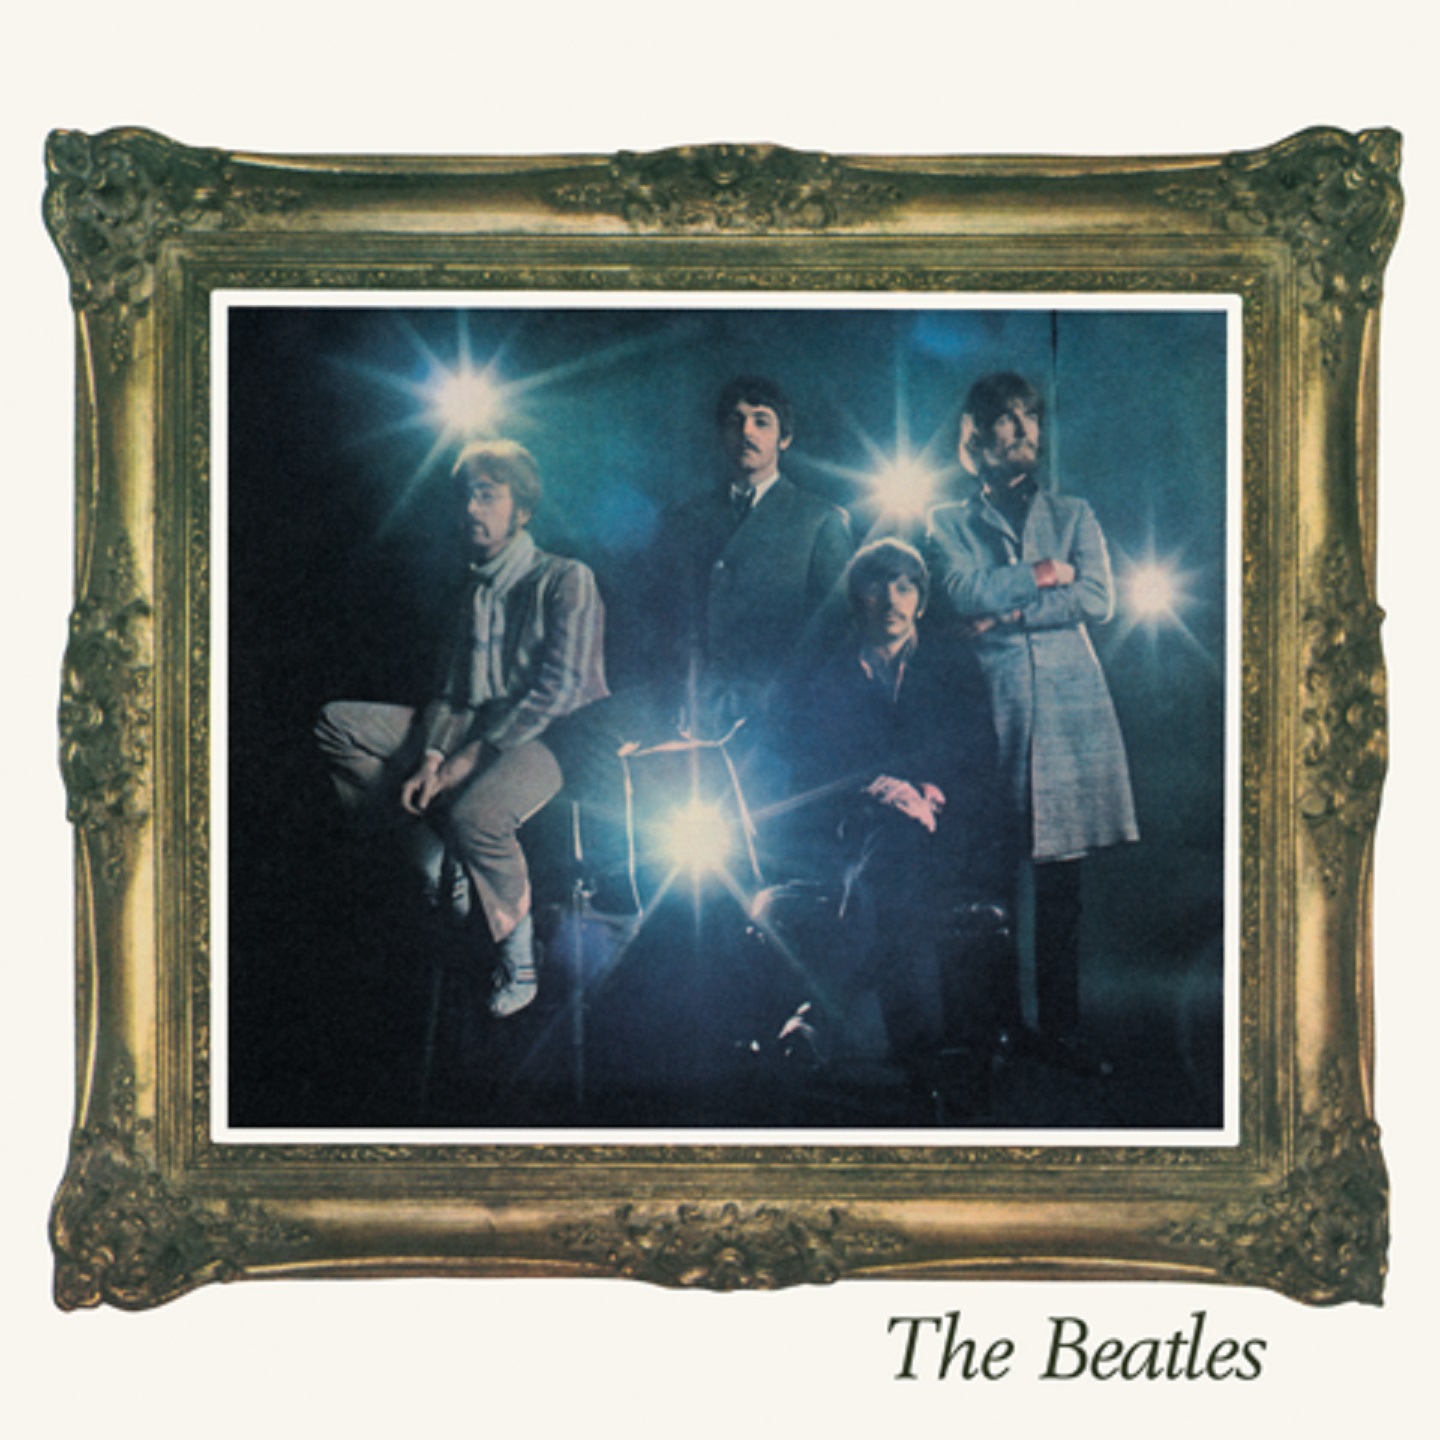 The Beatles - credit to Apple Music